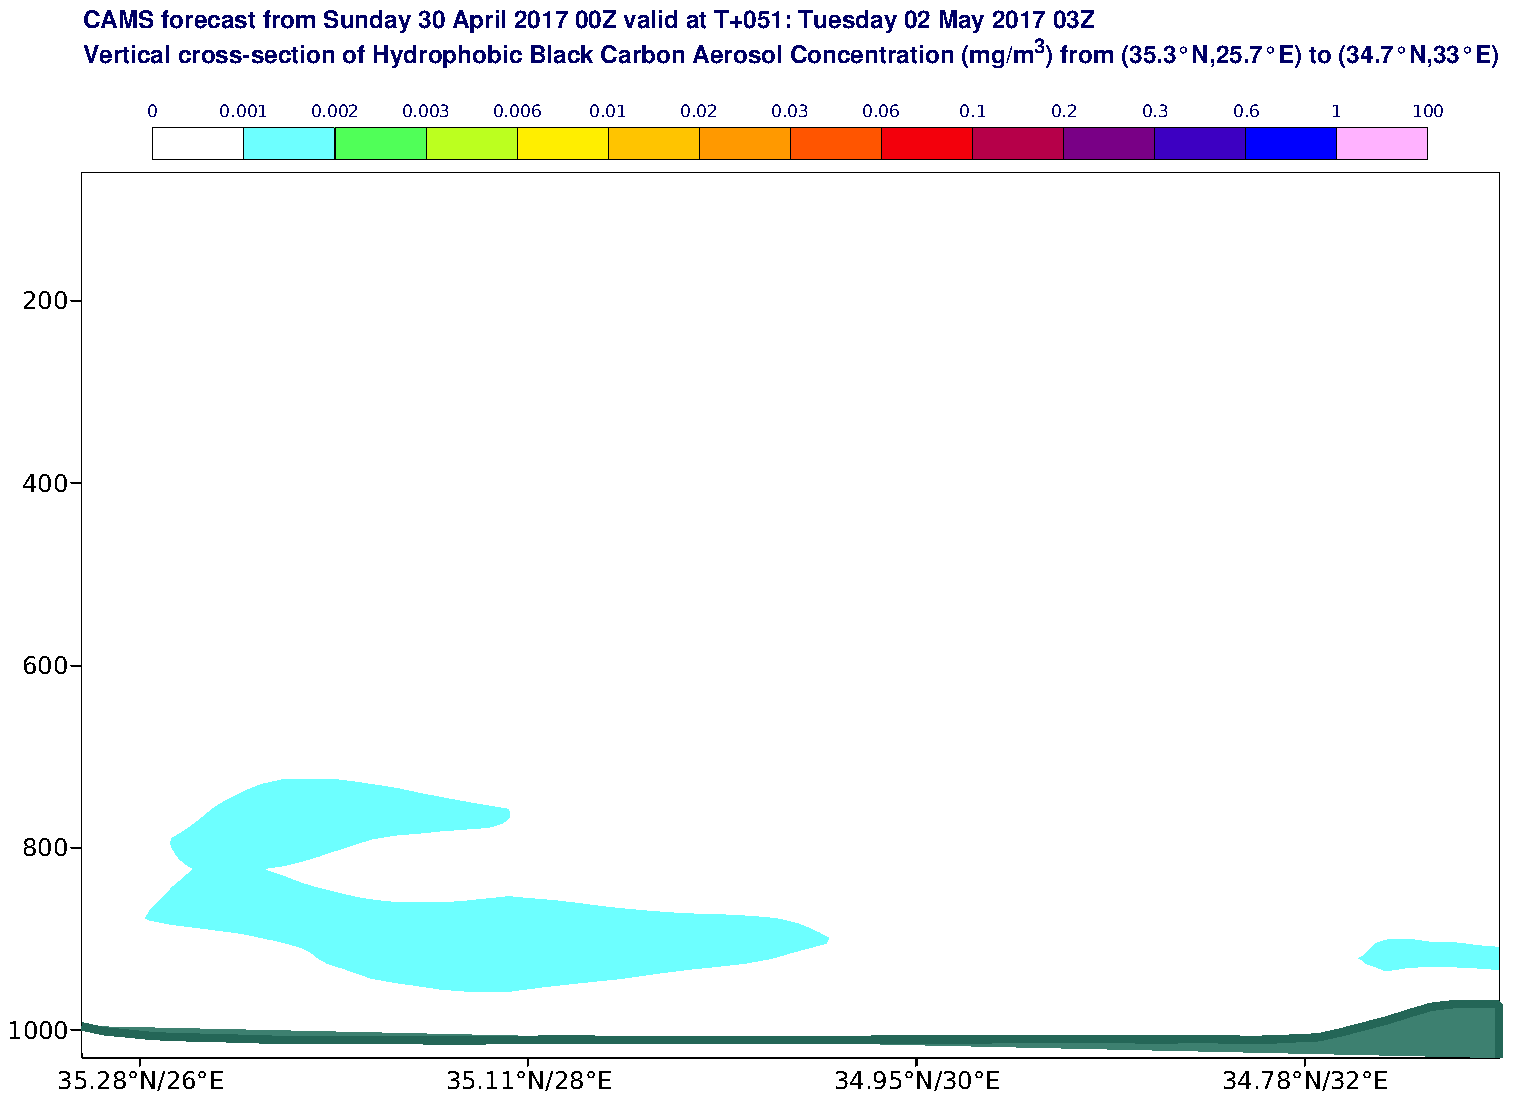 Vertical cross-section of Hydrophobic Black Carbon Aerosol Concentration (mg/m3) valid at T51 - 2017-05-02 03:00